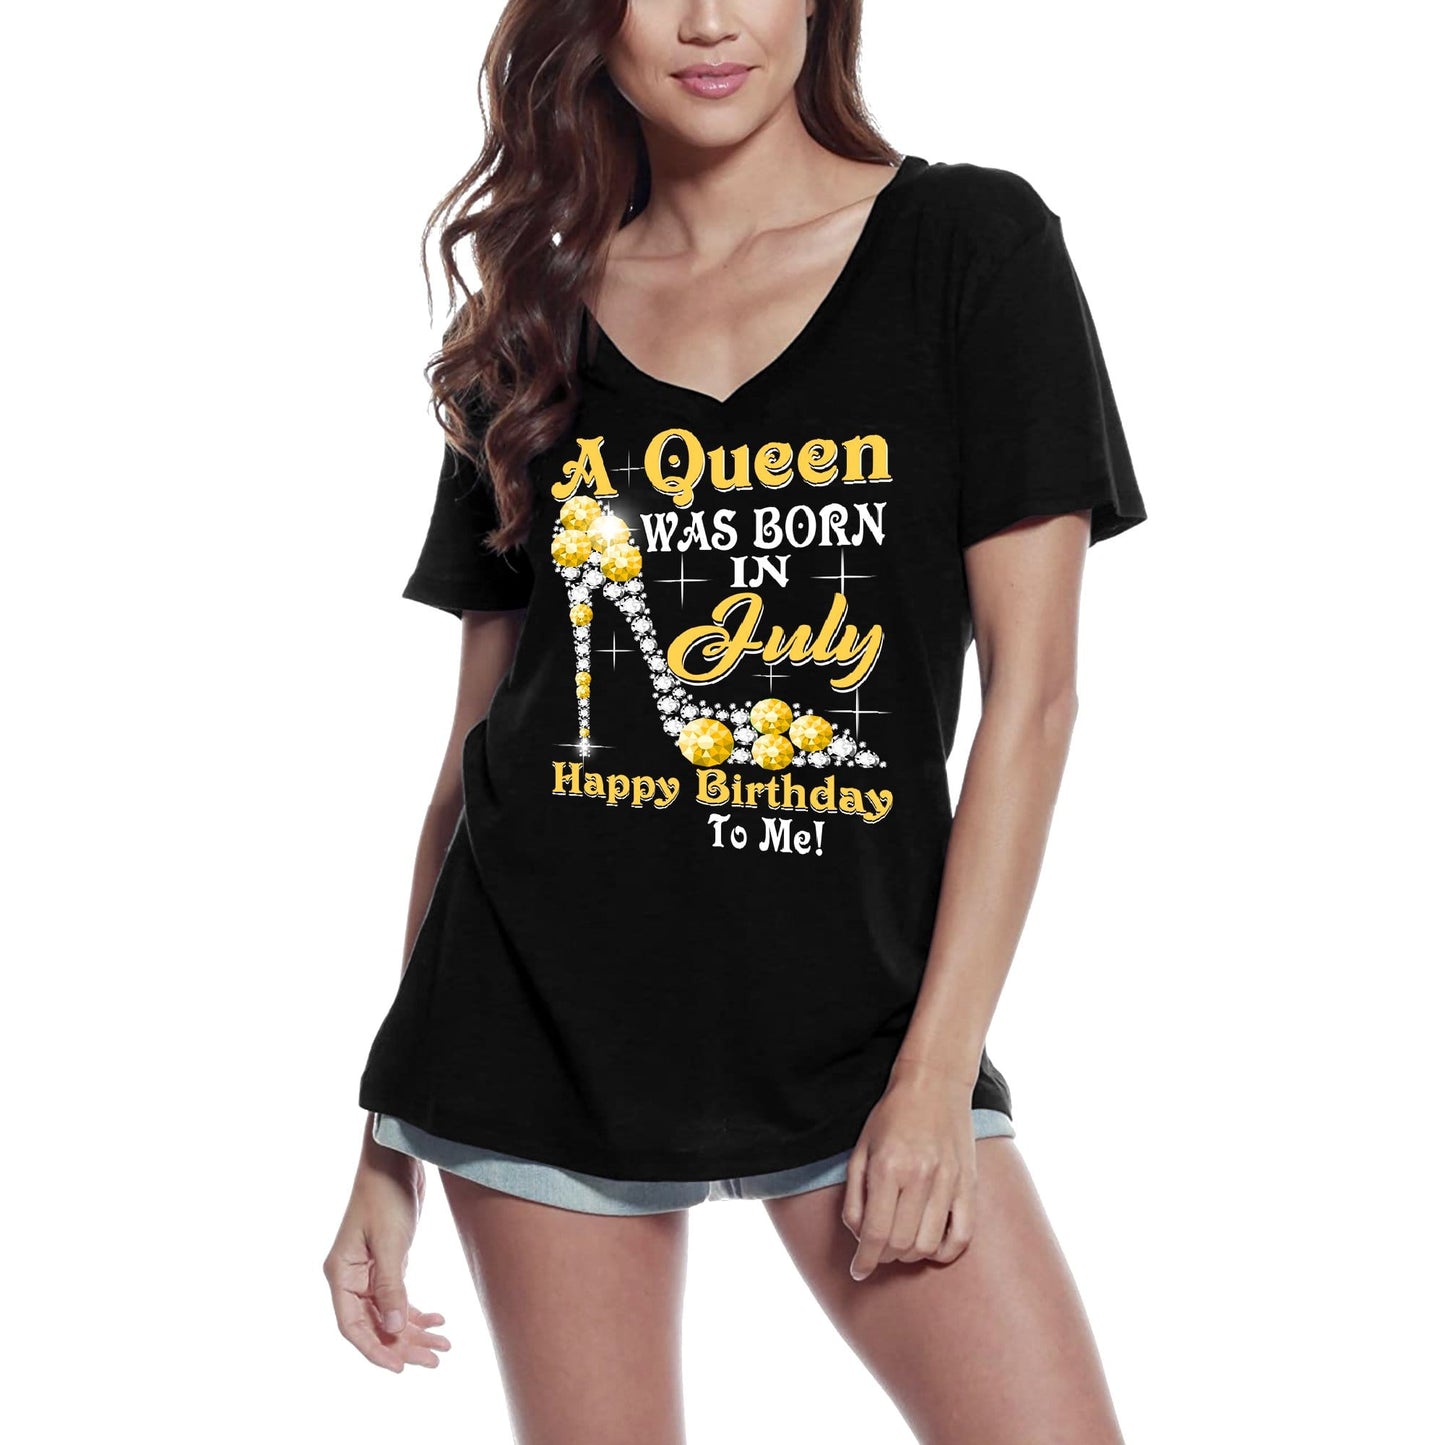 ULTRABASIC Women's T-Shirt A Queen Was Born in July - Happy Birthday to Me Shirt